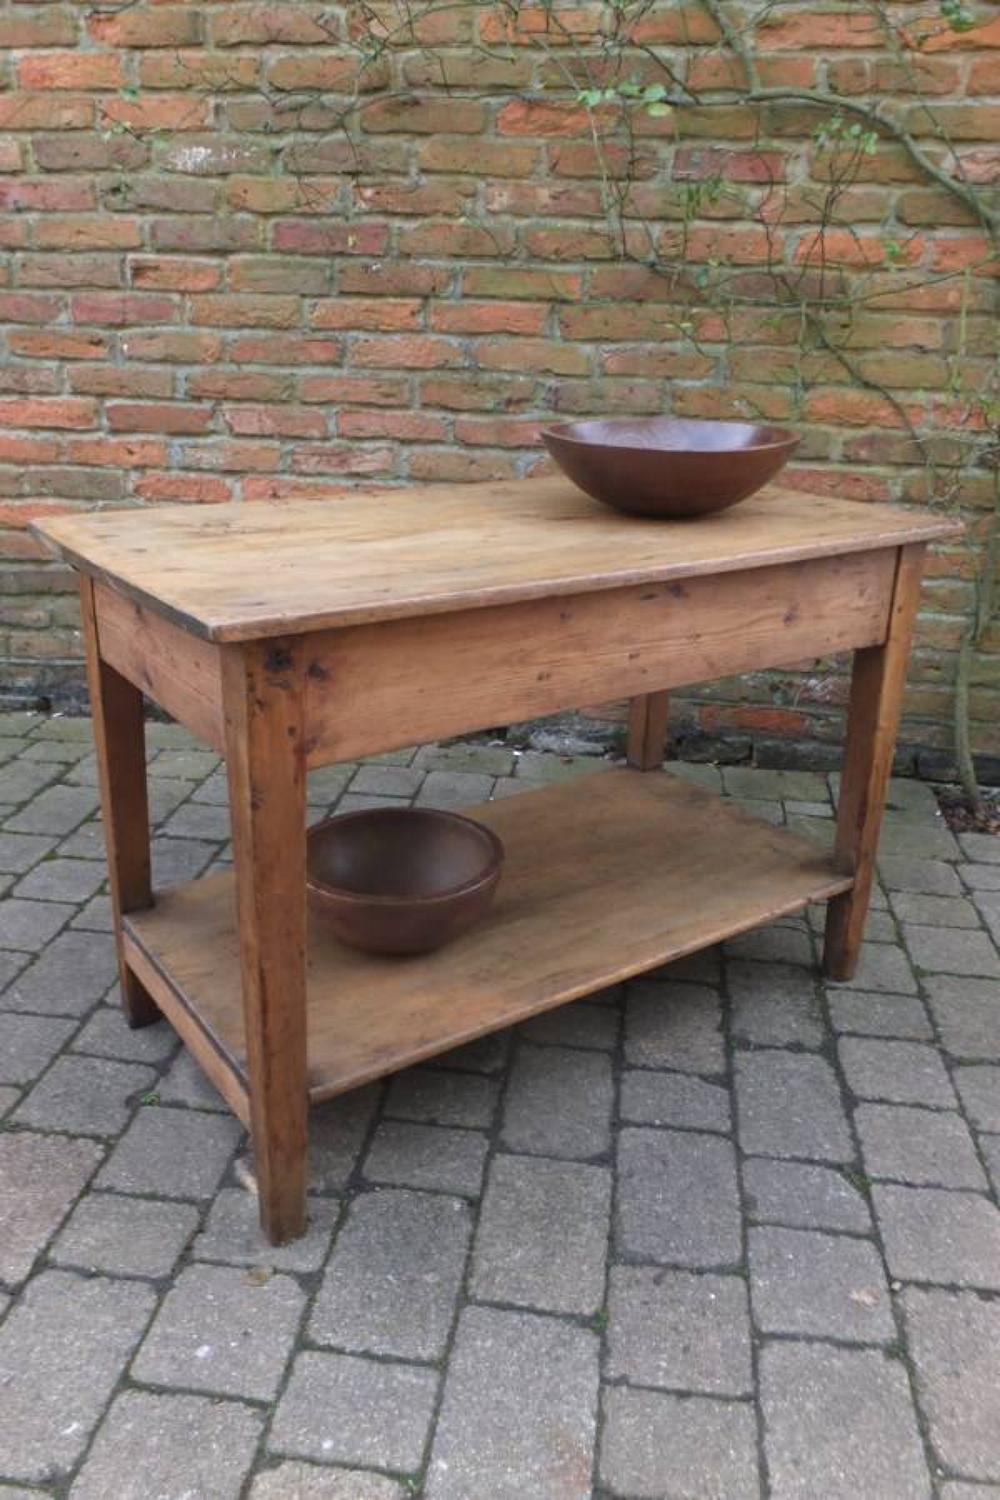 Early Victorian Pegged Pine Table with Pot Board Base